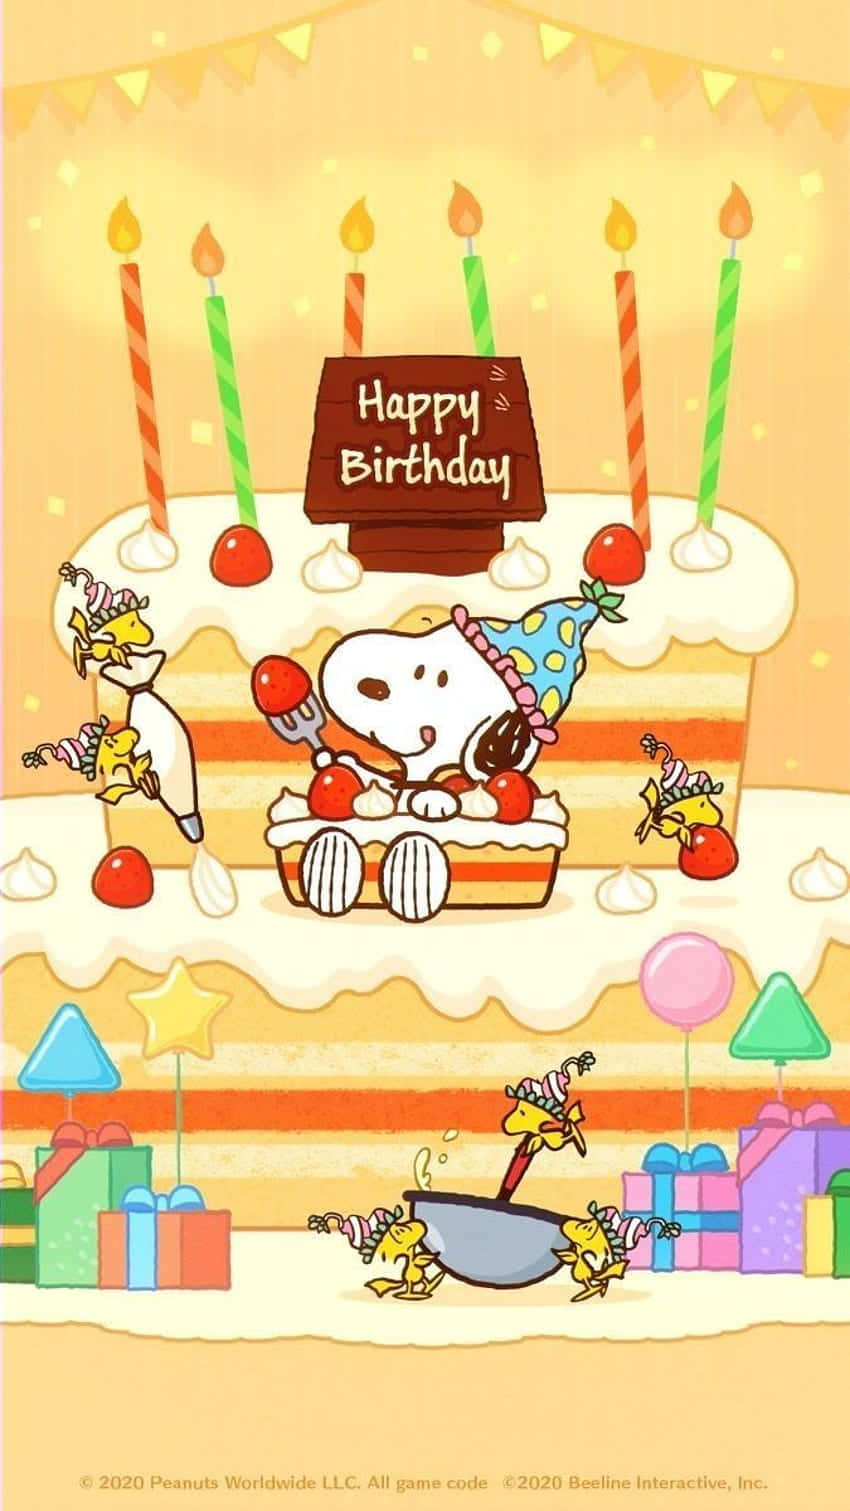 It's His Birthday, Celebrate with Charlie Brown! Wallpaper